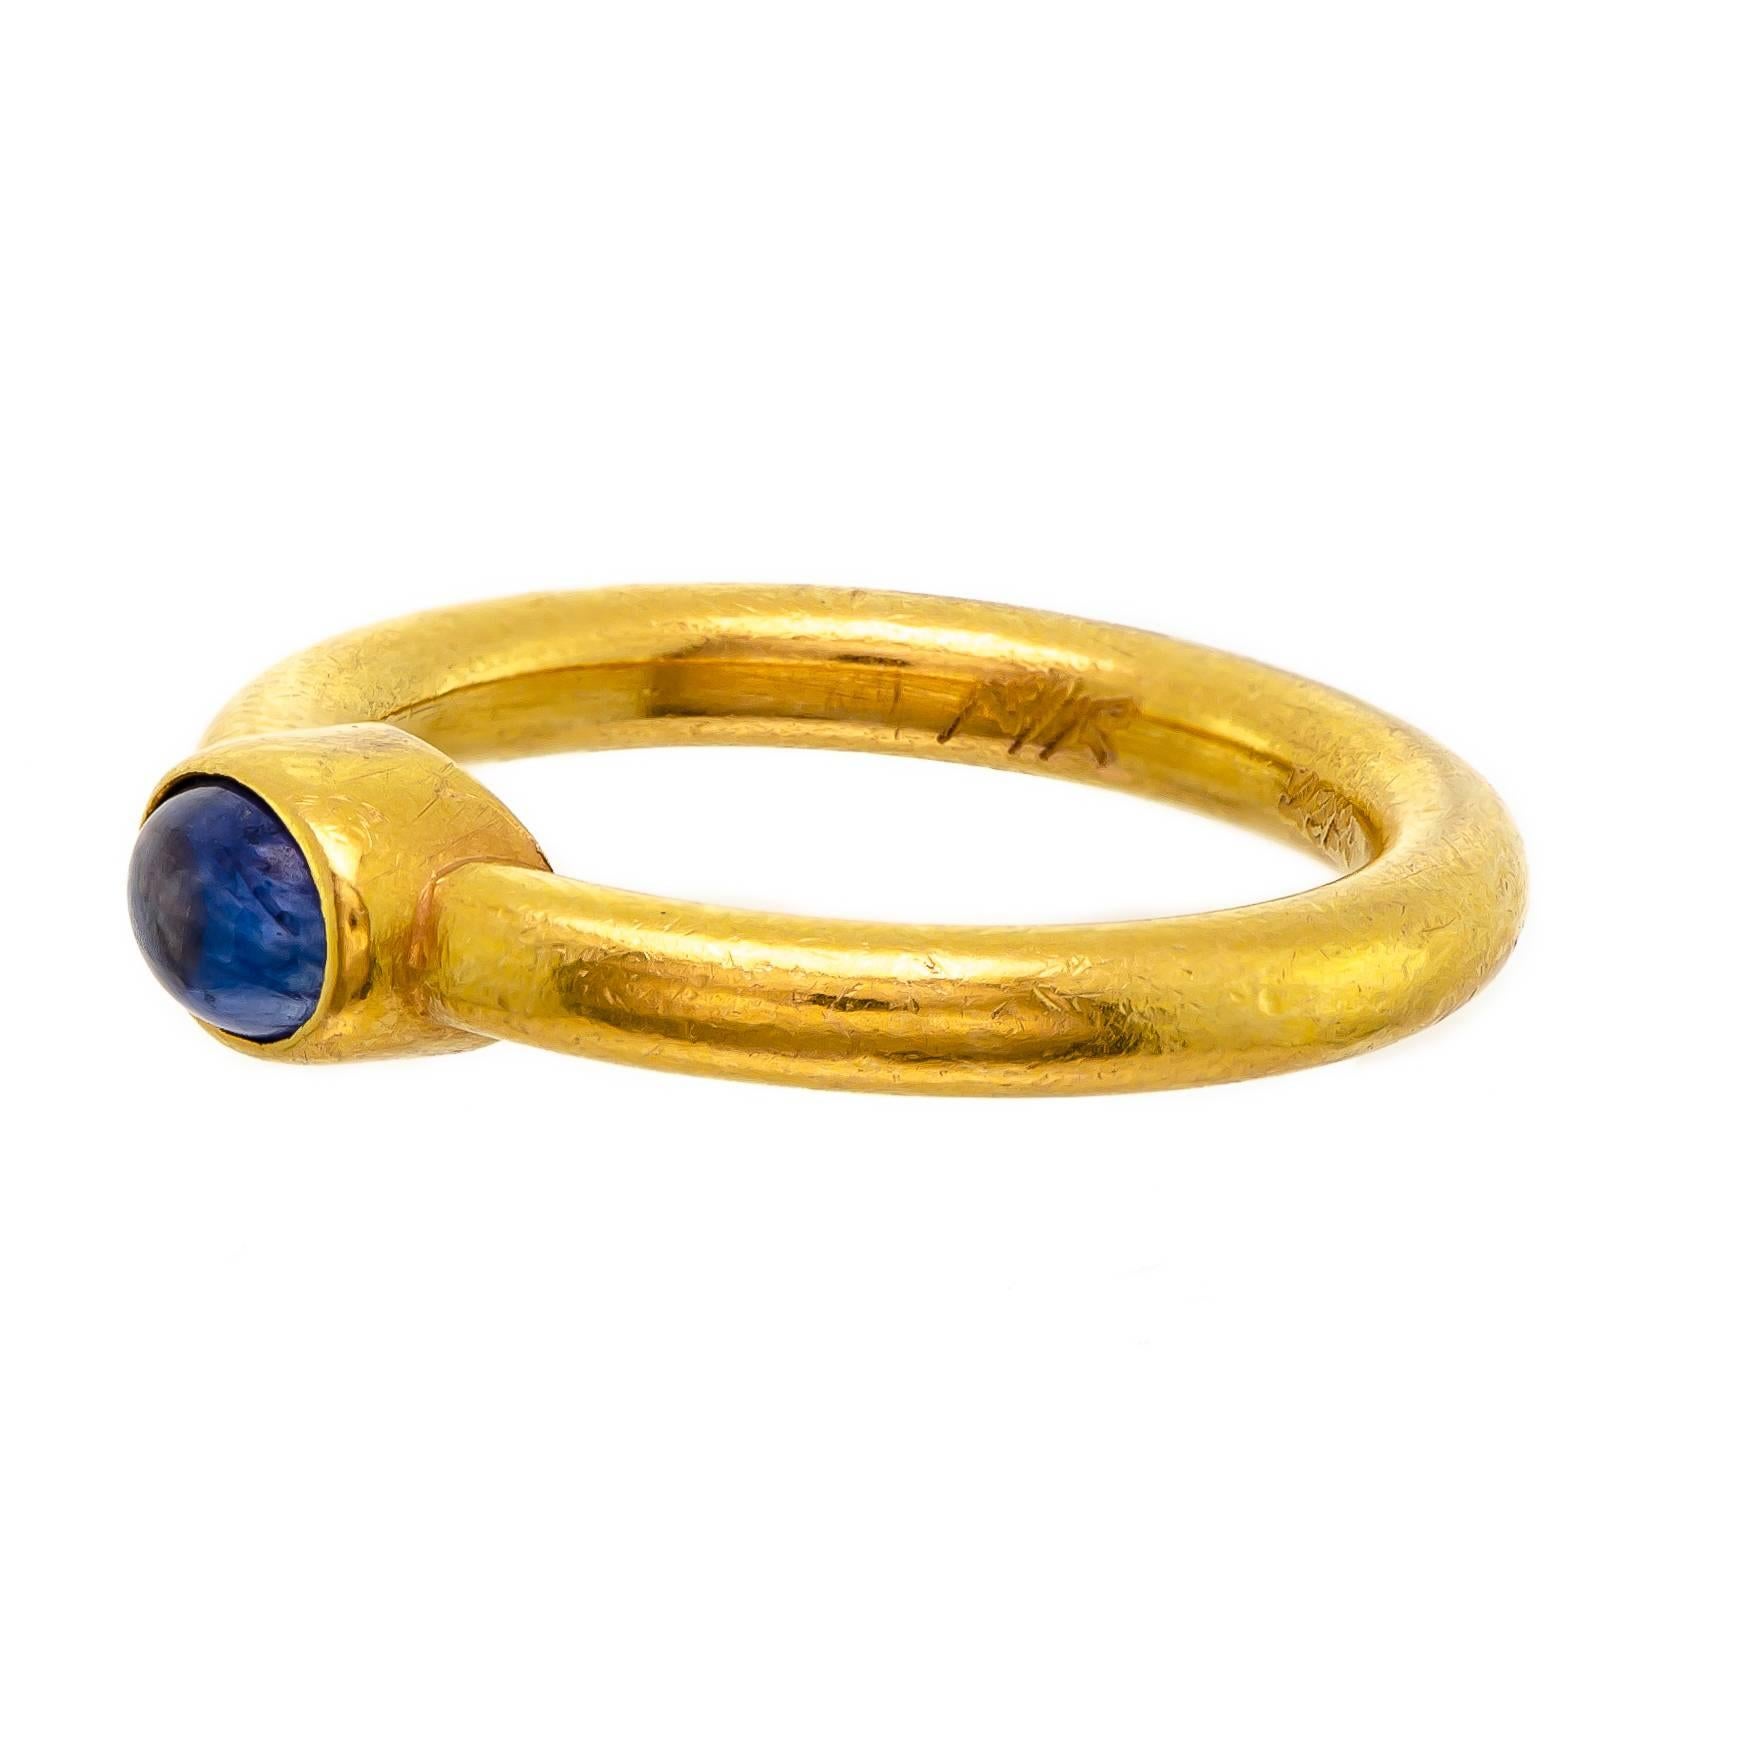 Attractive tailored 22 karat and cabochon sapphire ring centrally bezel set cabochon sapphire brushed finish 22 karat mount - current ring size 5.5 + -hallmarked shank Very good condition - Great look

Cabochon approx 3/8 inch across - petite sized